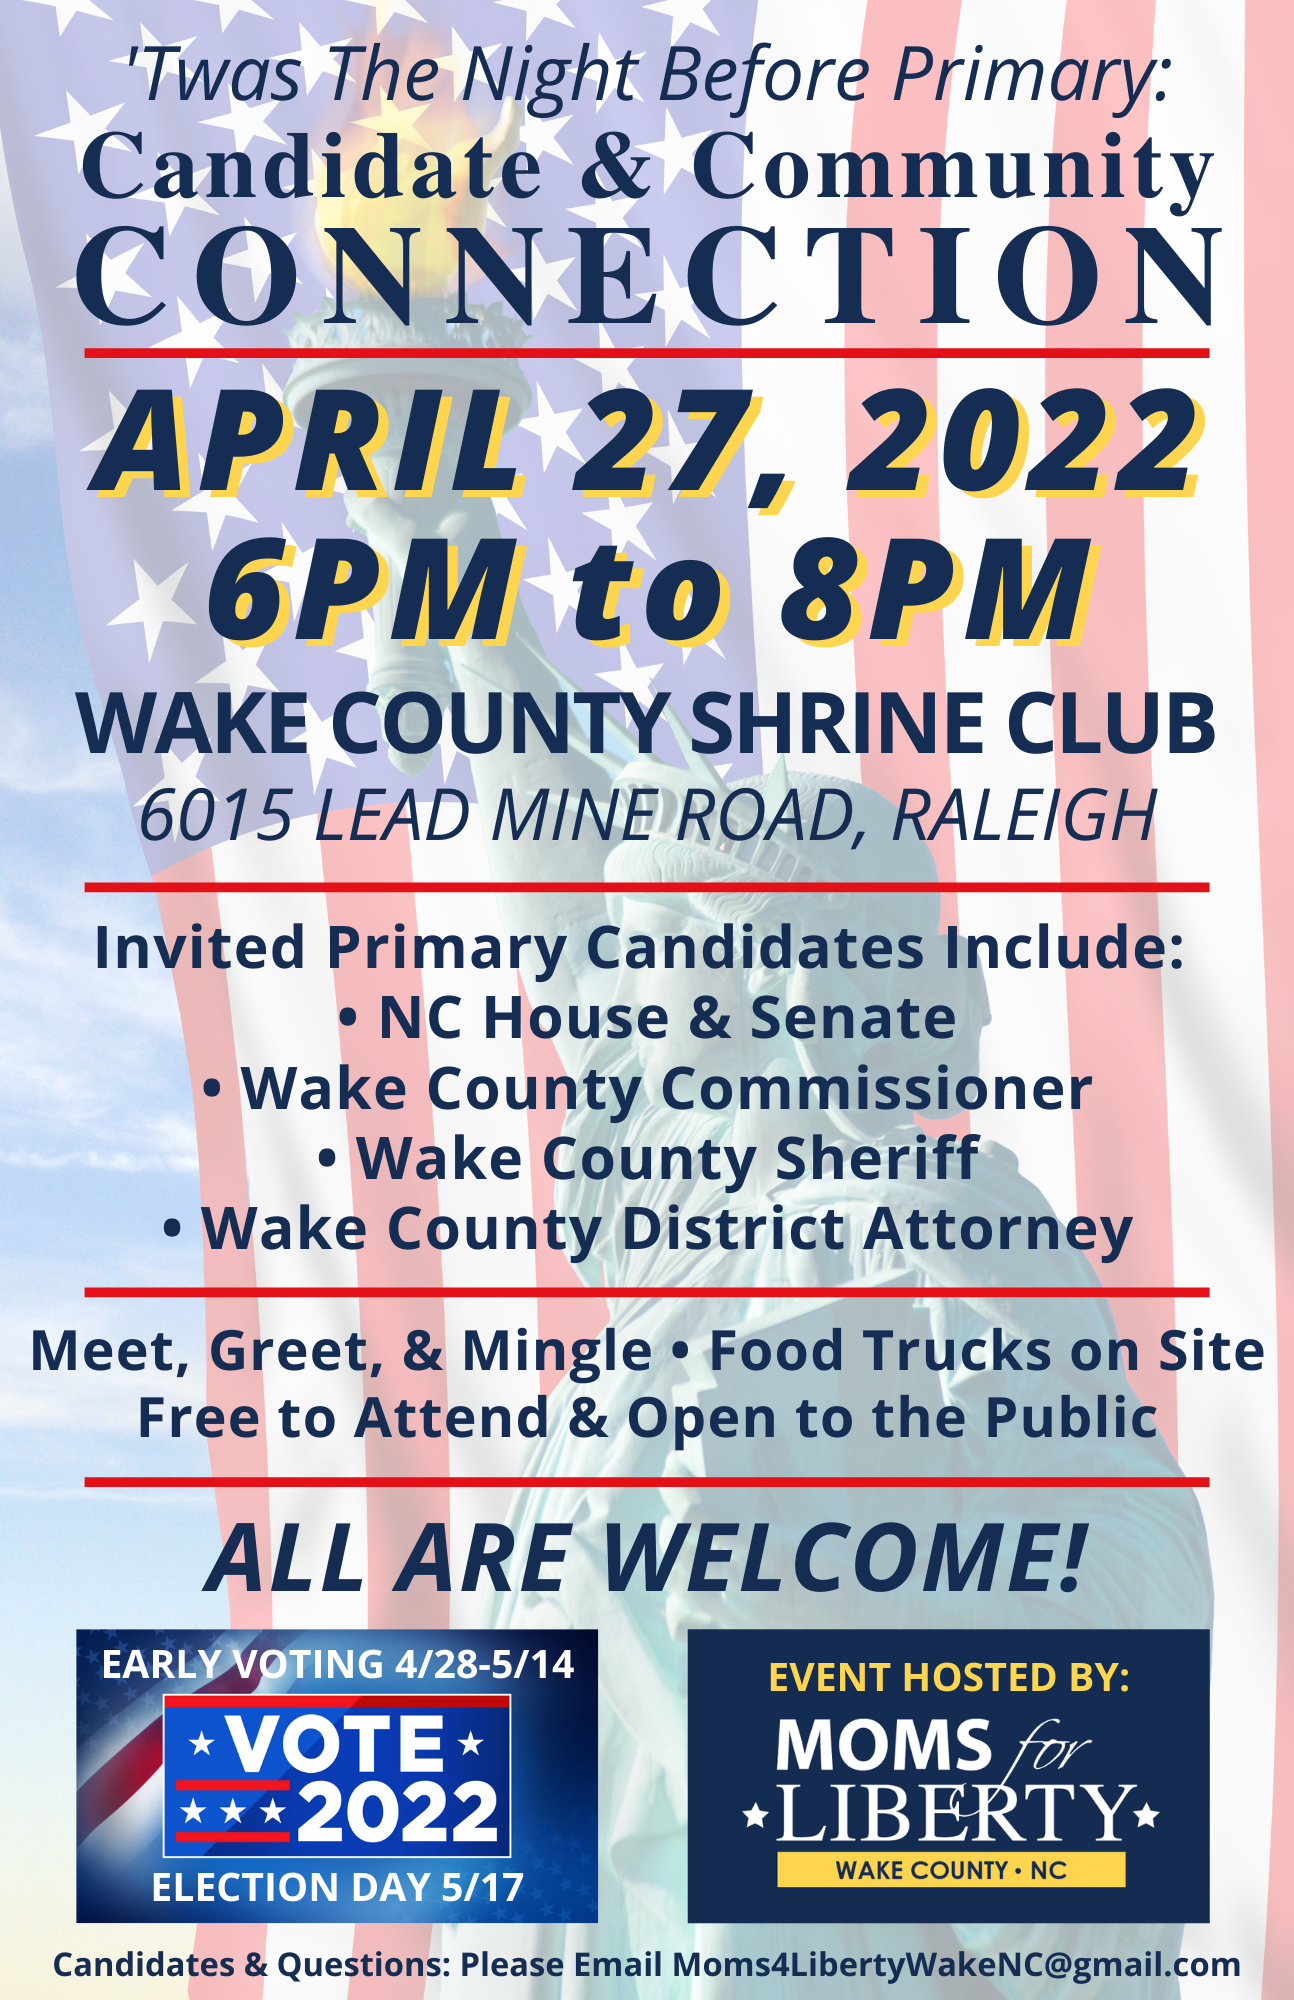 Wake County, NC - Candidate & Community Connection